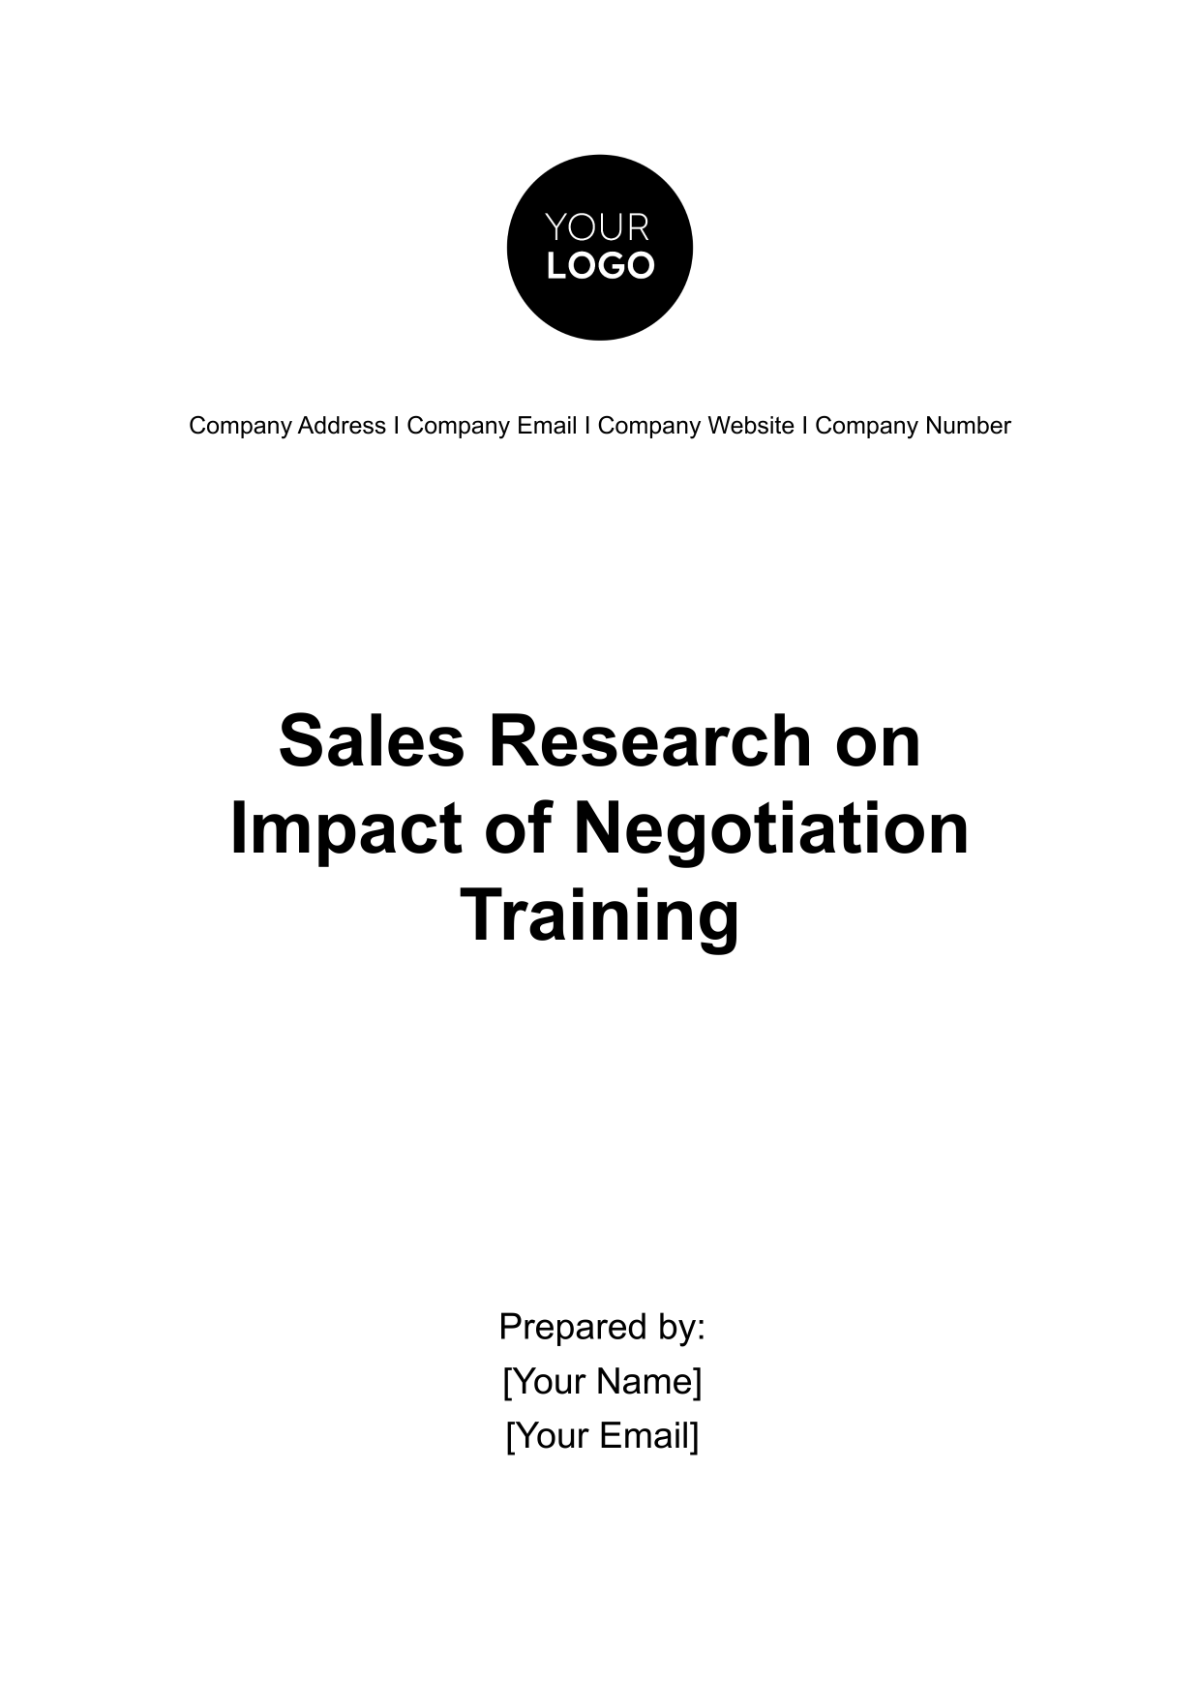 Sales Research on Impact of Negotiation Training Template